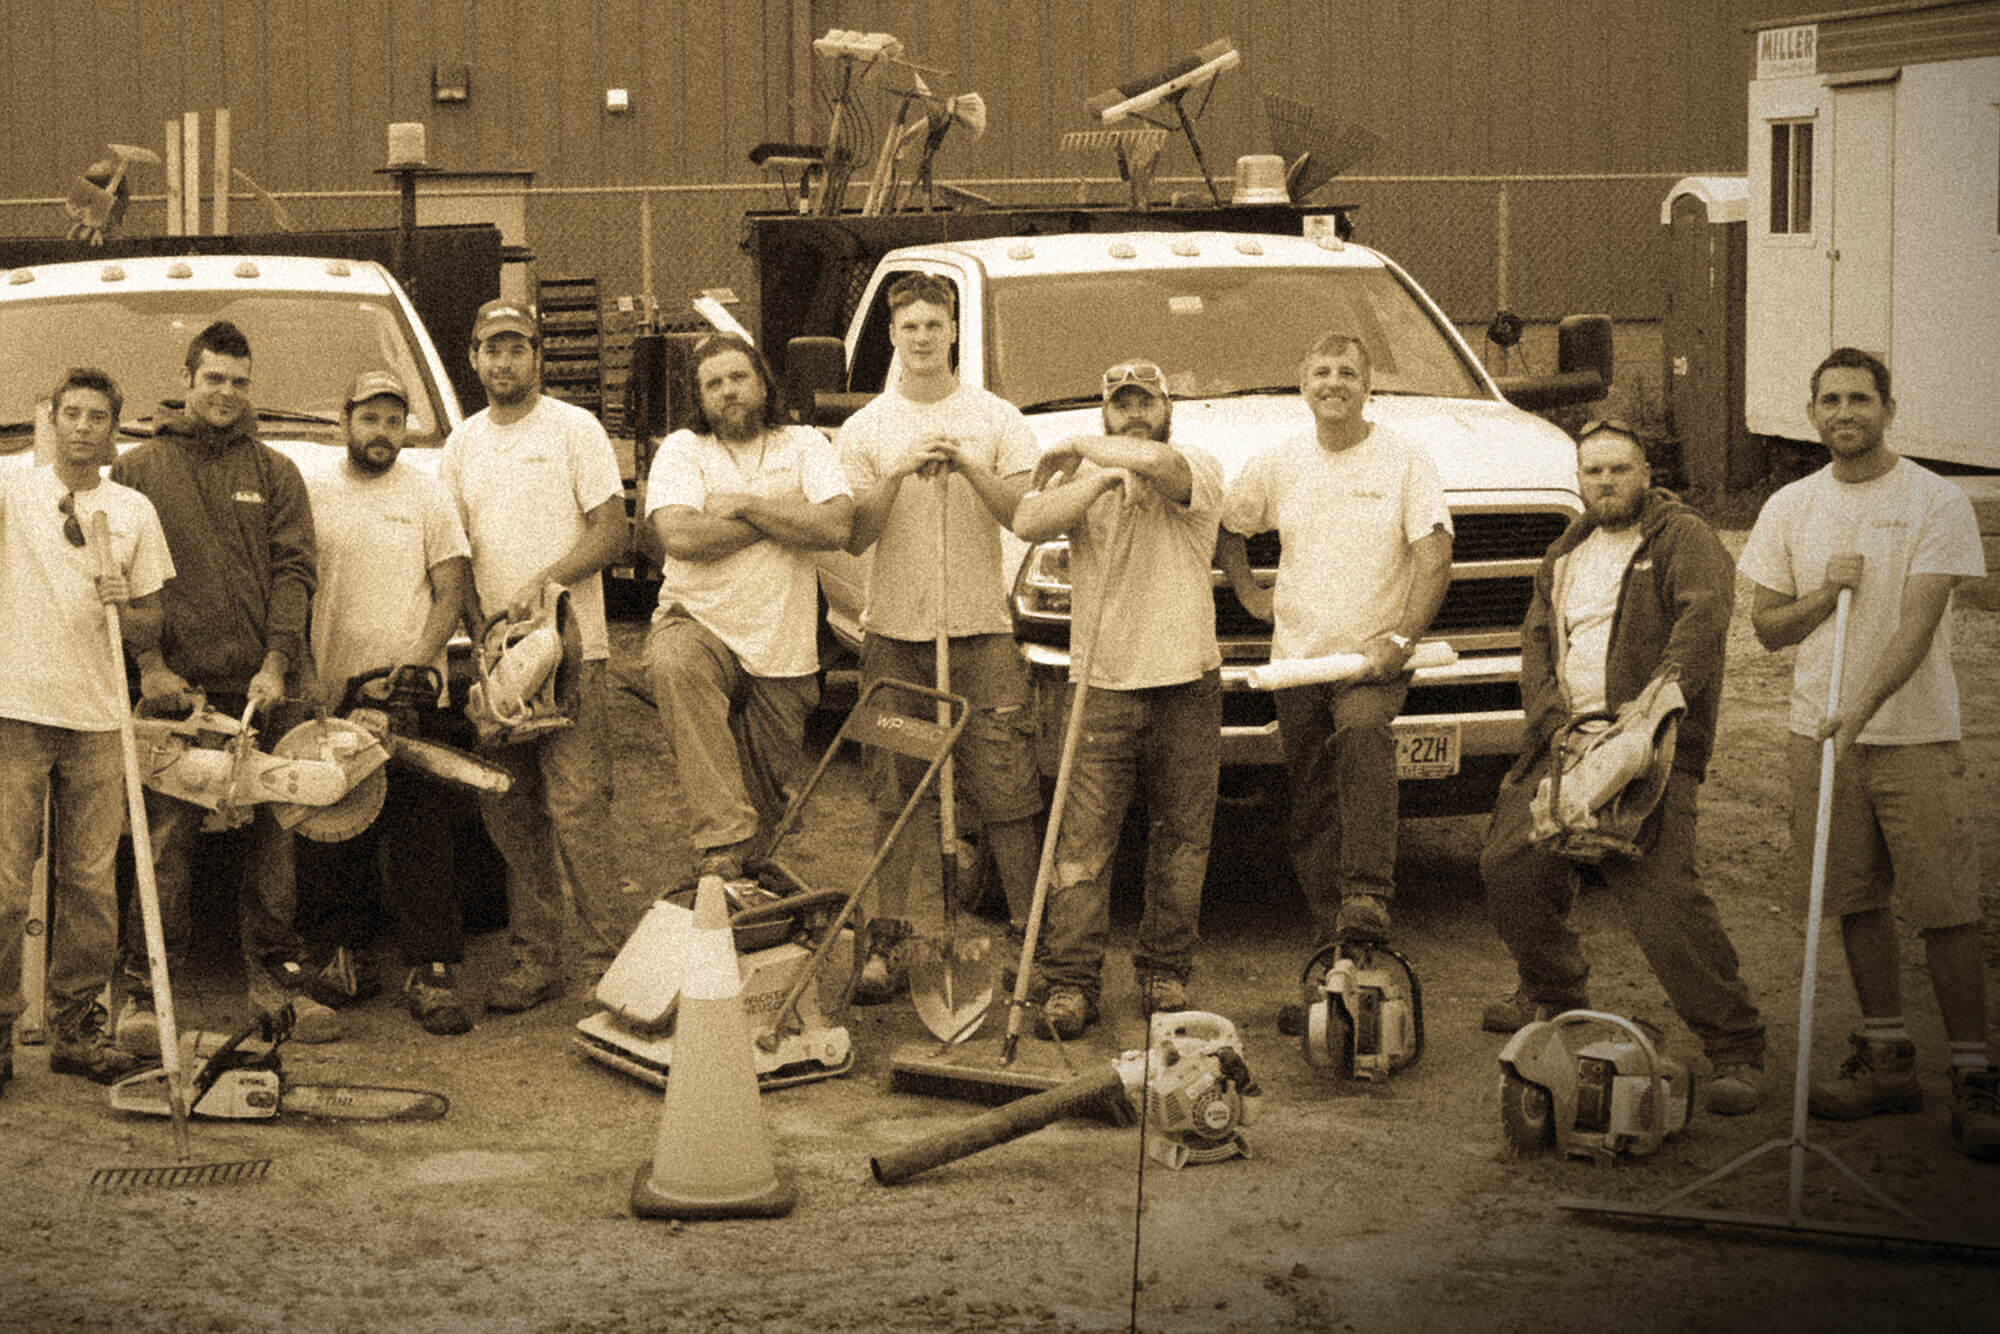 group of men with trucks and tools in a shop yard